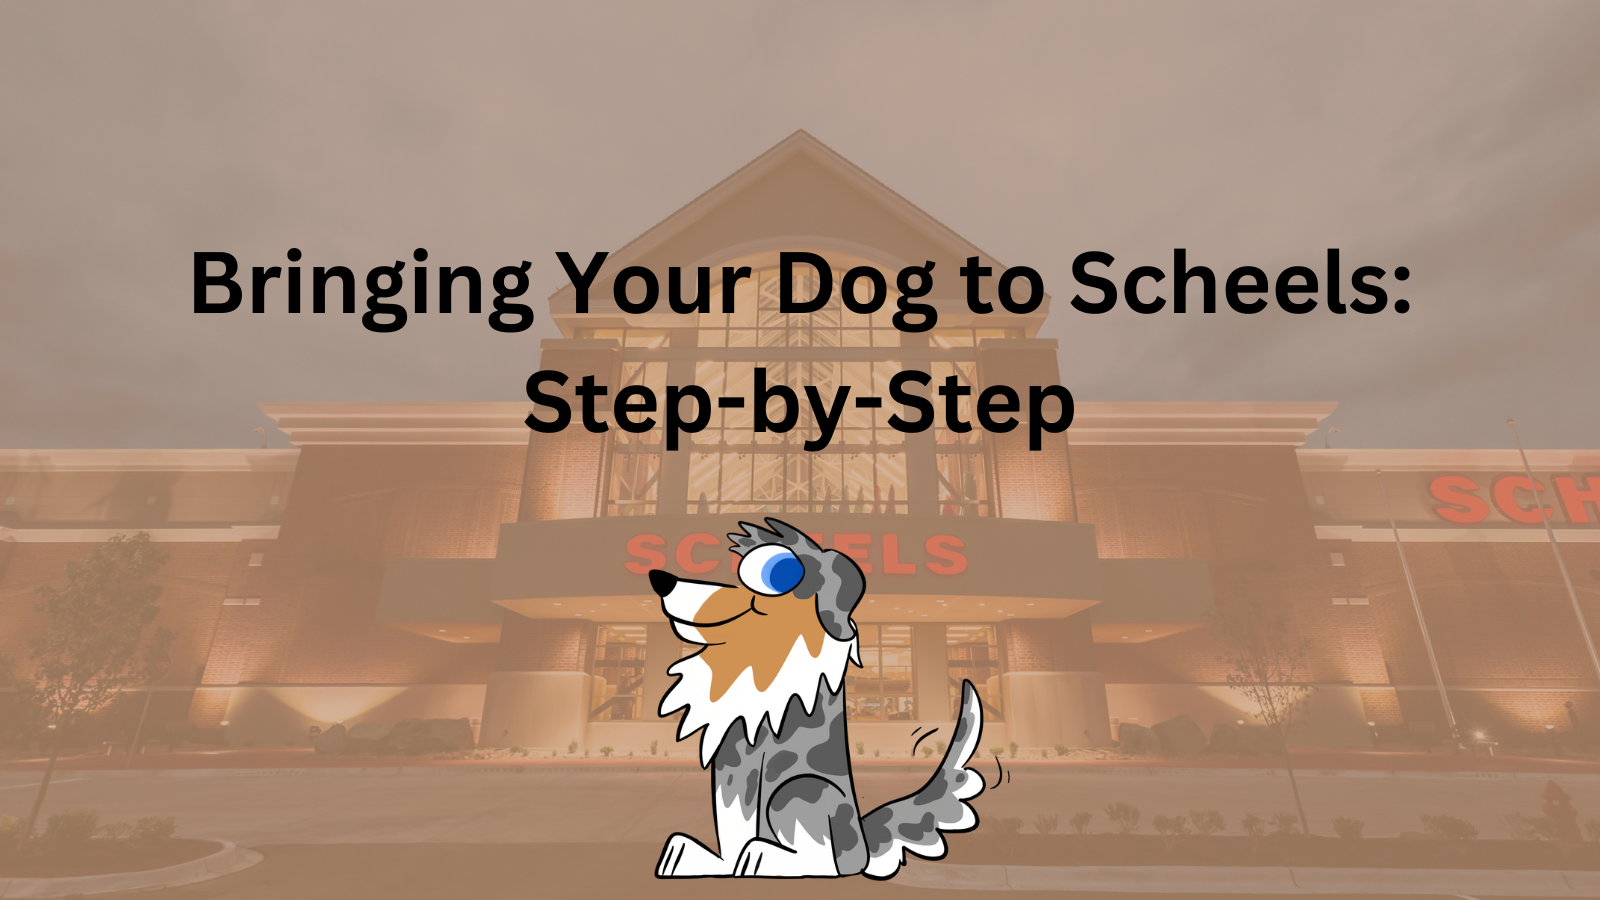 Image Text: "Bringing Your Dog to Scheels: Step-by-Step"